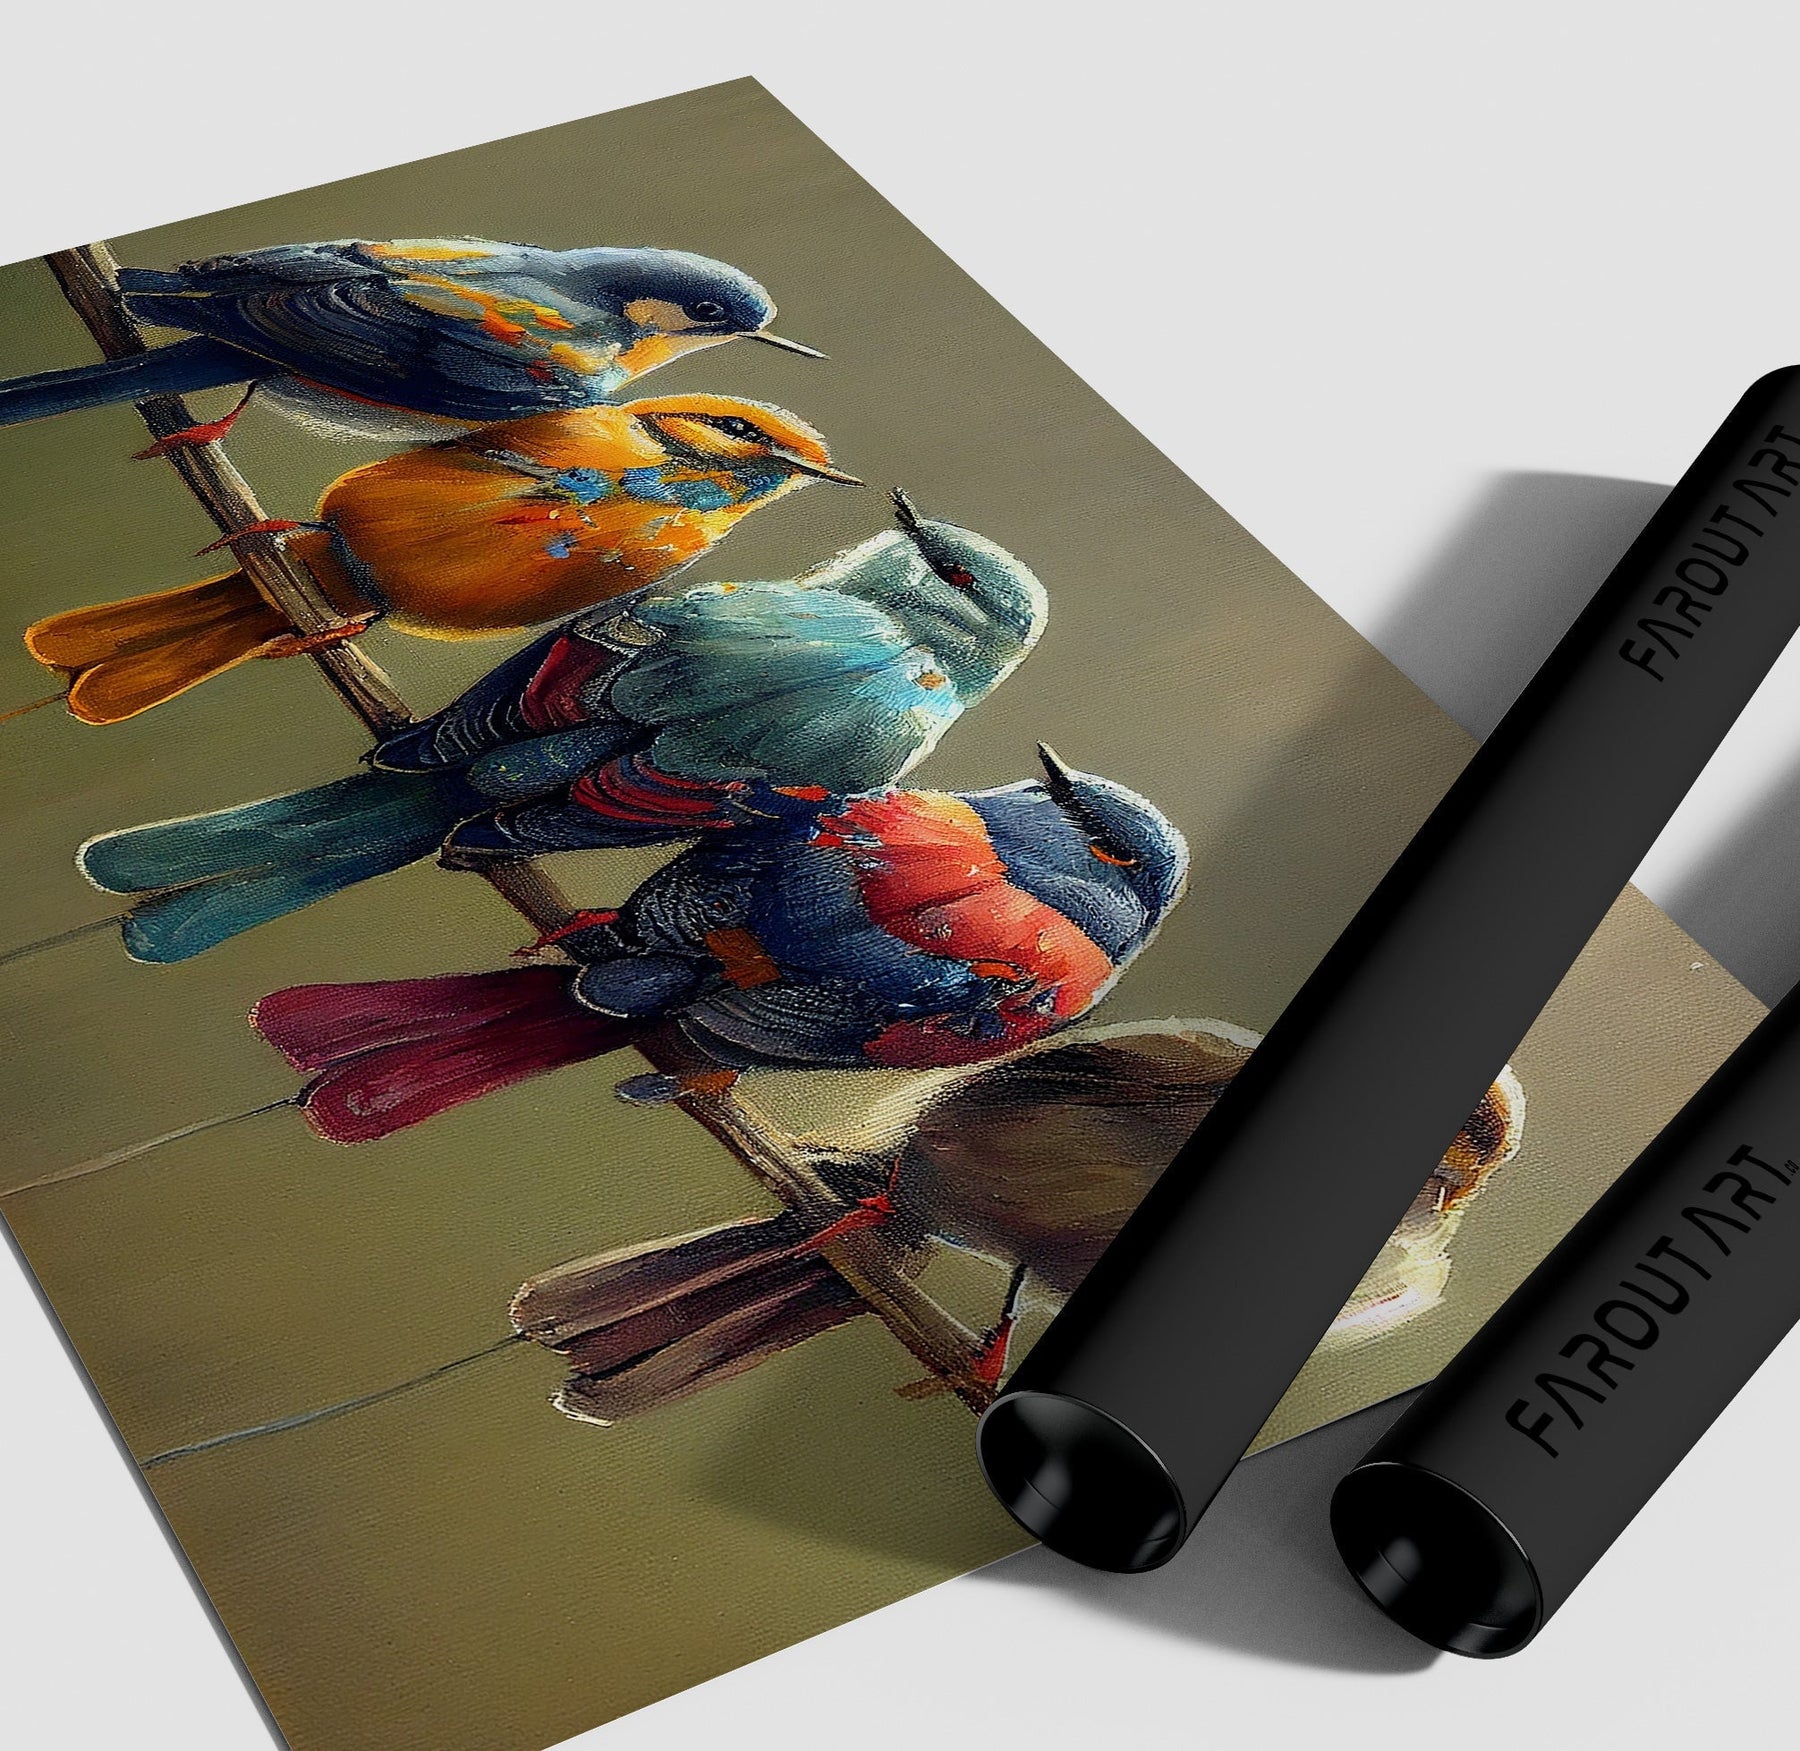 Flock Together Poster/Canvas | Far Out Art 